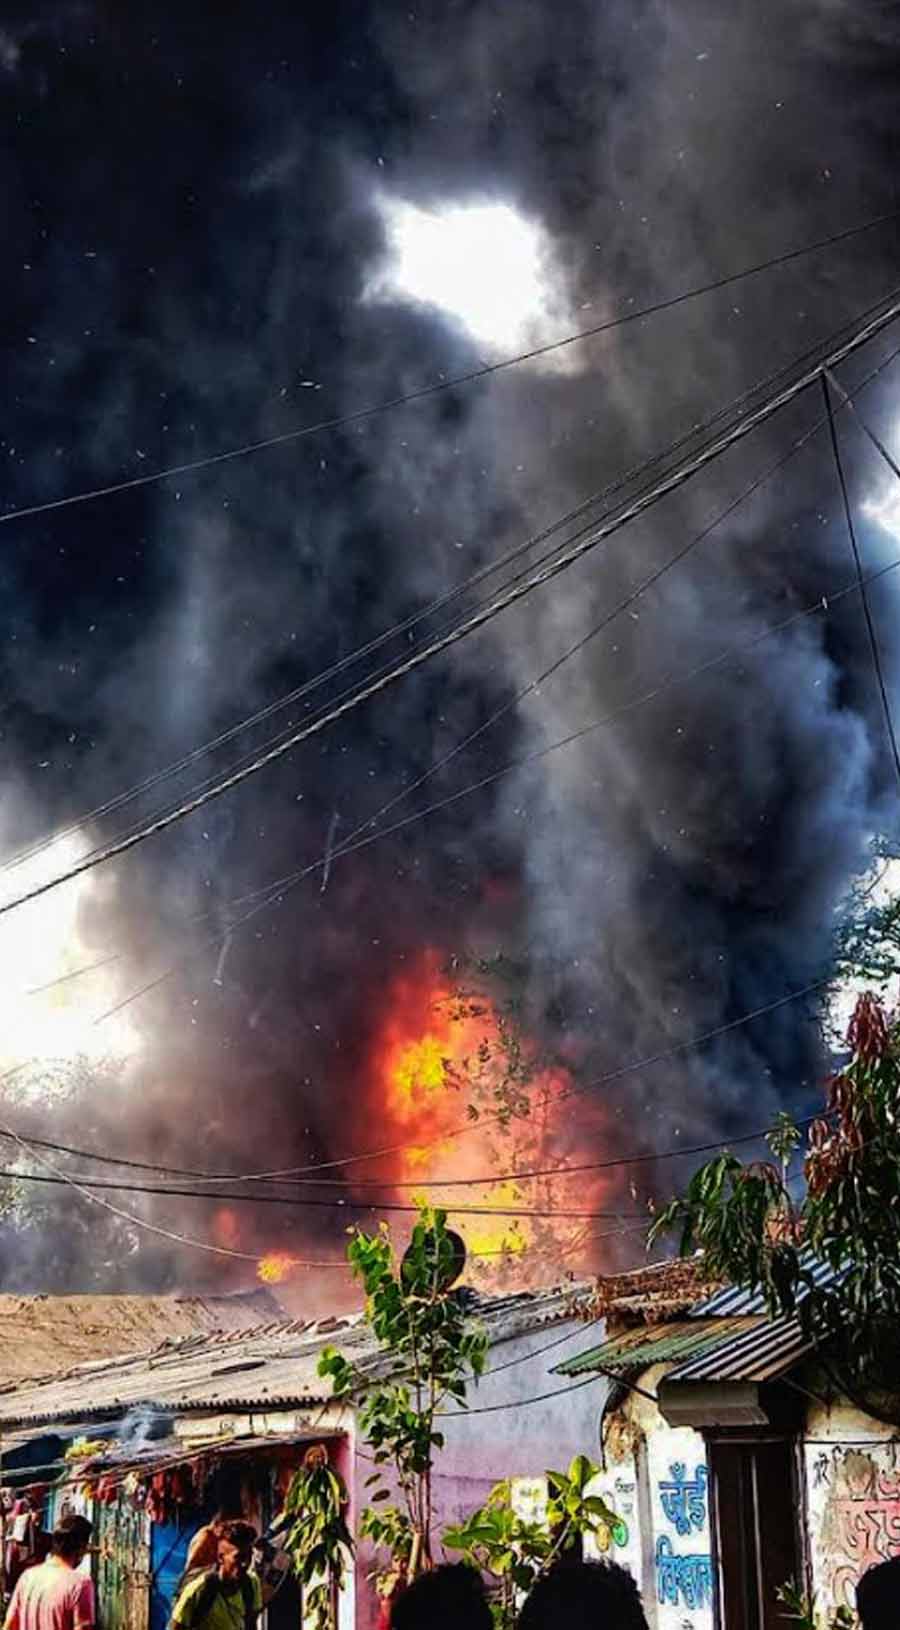 FACTORY BLAZE: Smoke billows from a paint factory on Chetla Road where a huge fire broke out on Tuesday, March 22. Ten fire tenders were pressed into action. The factory allegedly contained inflammable articles and was gutted by the time the fire could be extinguished